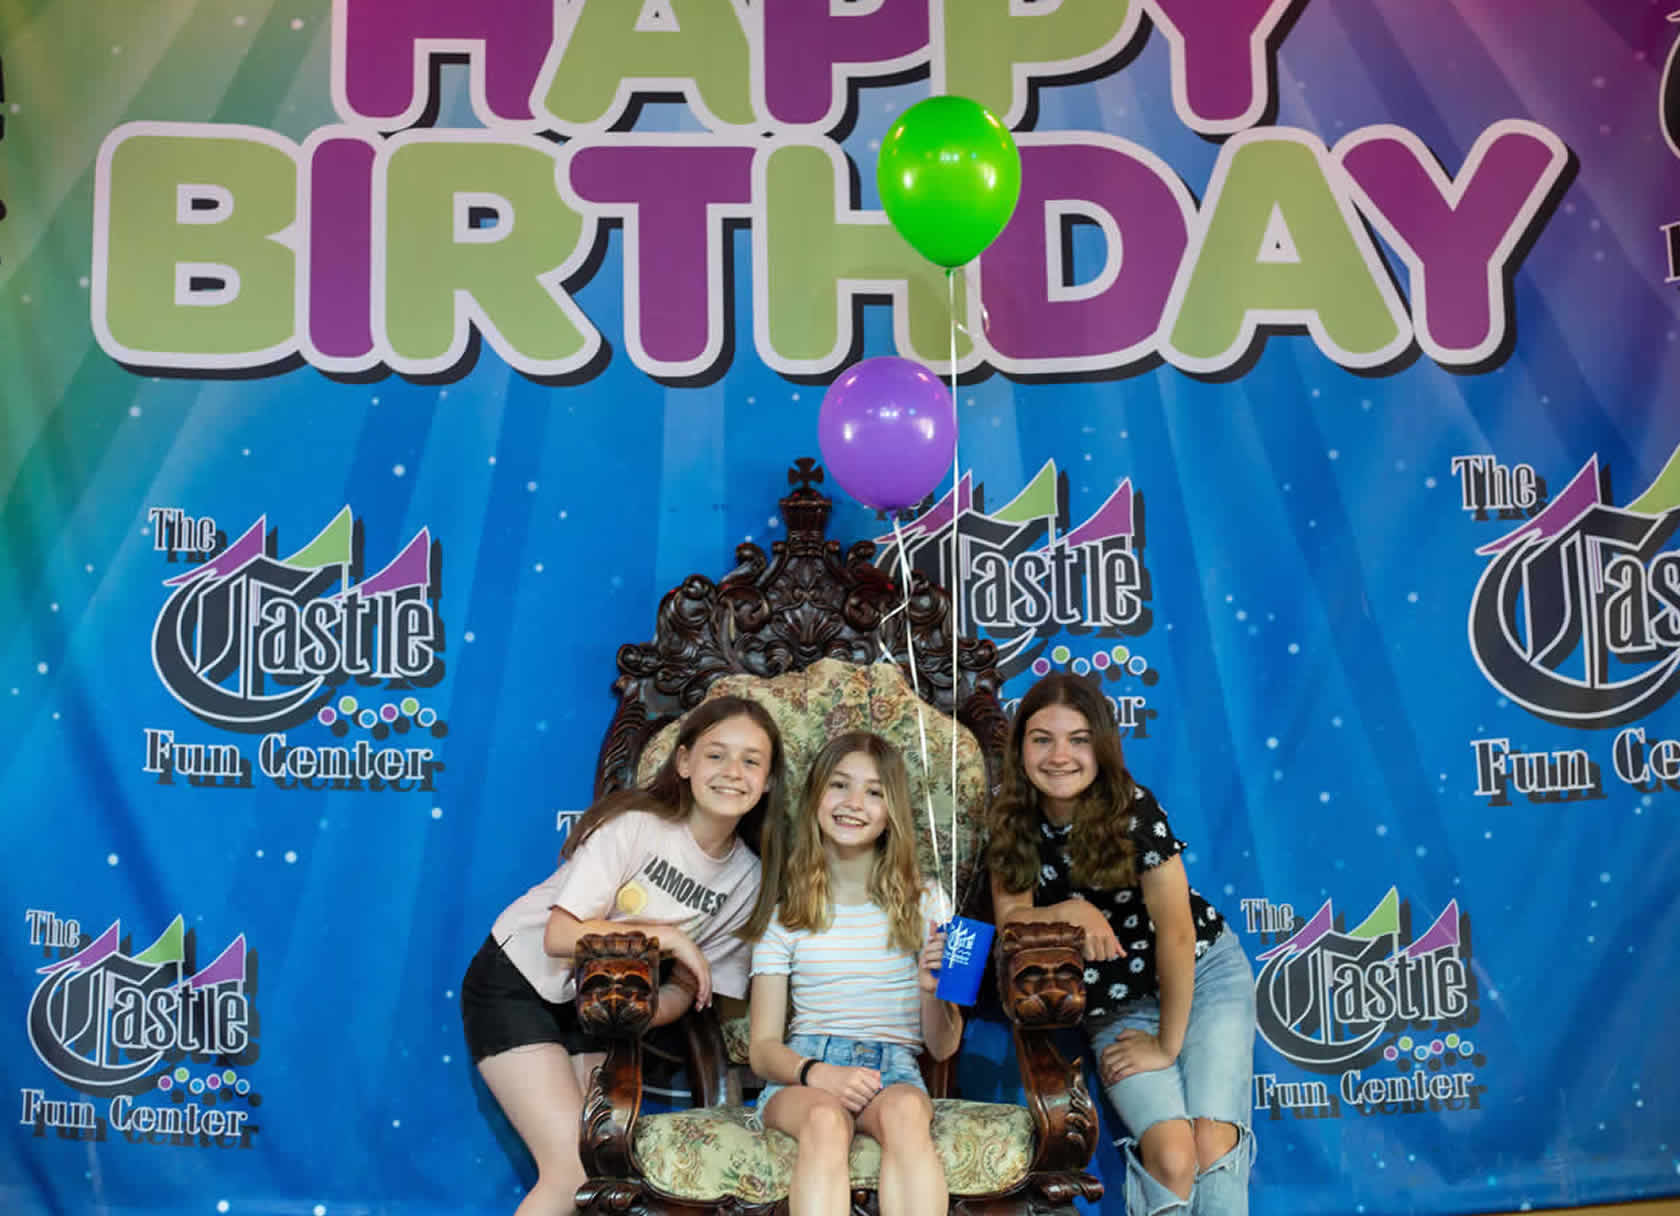 Birthday party picture